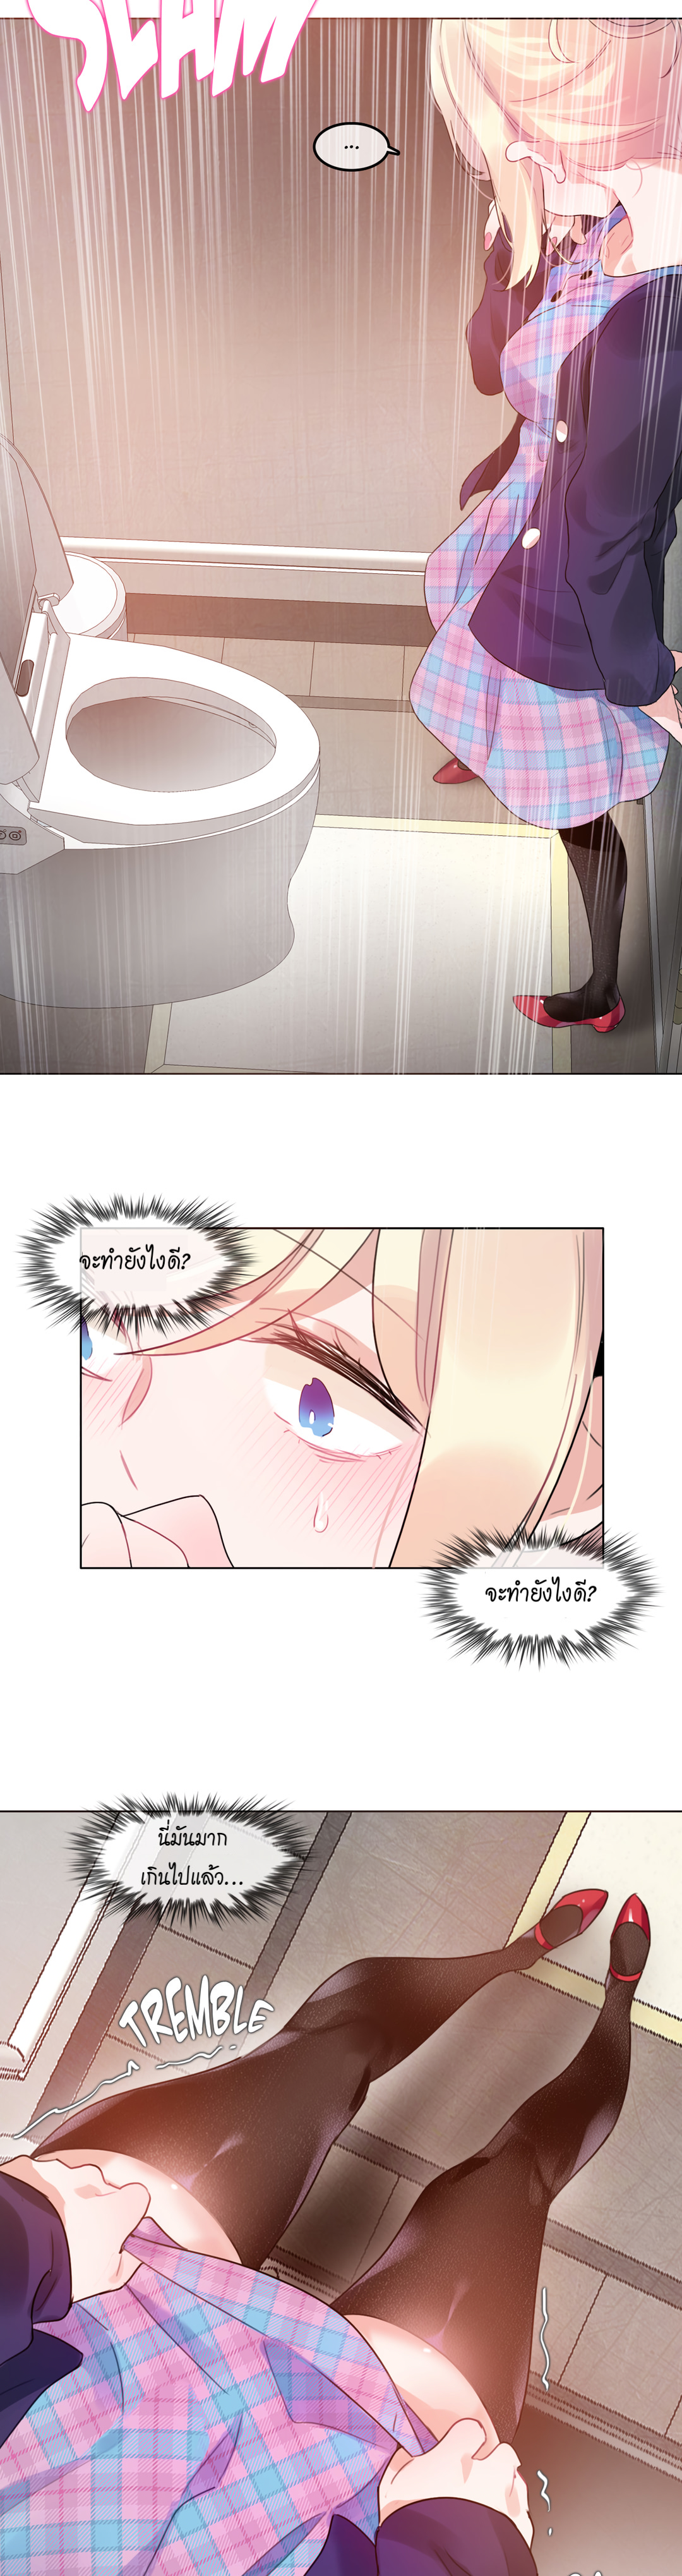 A Pervert’s Daily Life53 (4)